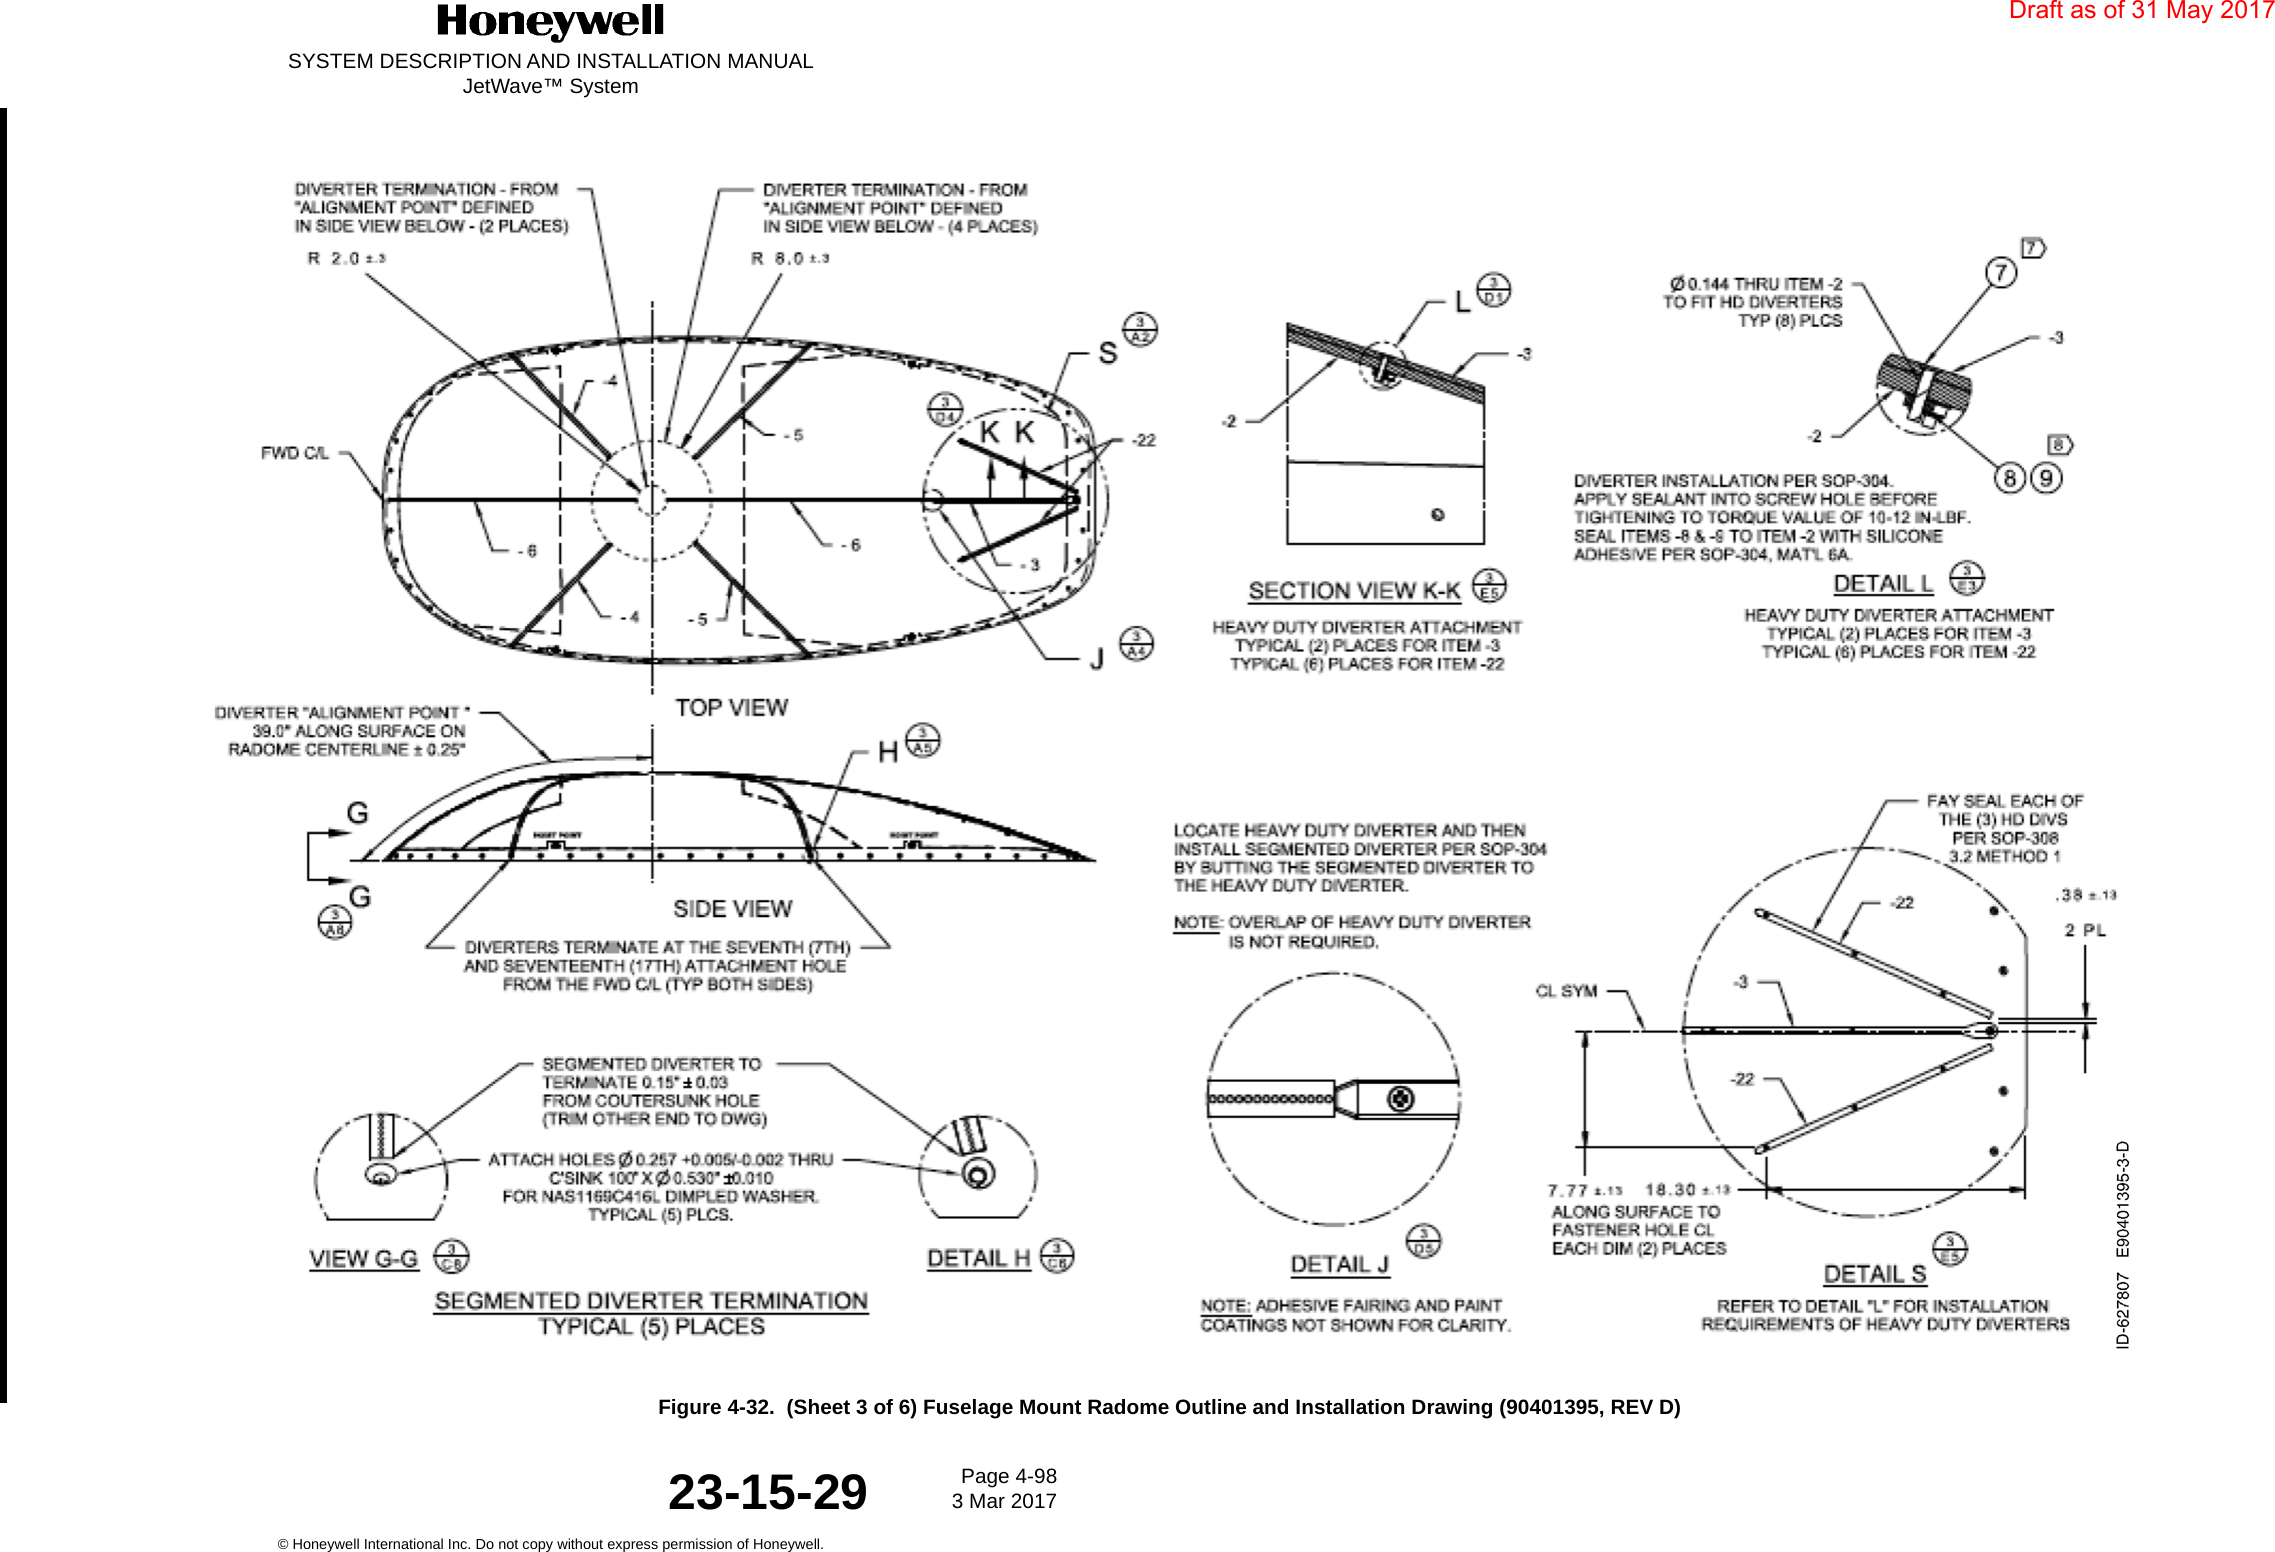 SYSTEM DESCRIPTION AND INSTALLATION MANUALJetWave™ SystemPage 4-98 3 Mar 2017© Honeywell International Inc. Do not copy without express permission of Honeywell.23-15-29Figure 4-32.  (Sheet 3 of 6) Fuselage Mount Radome Outline and Installation Drawing (90401395, REV D)Draft as of 31 May 2017